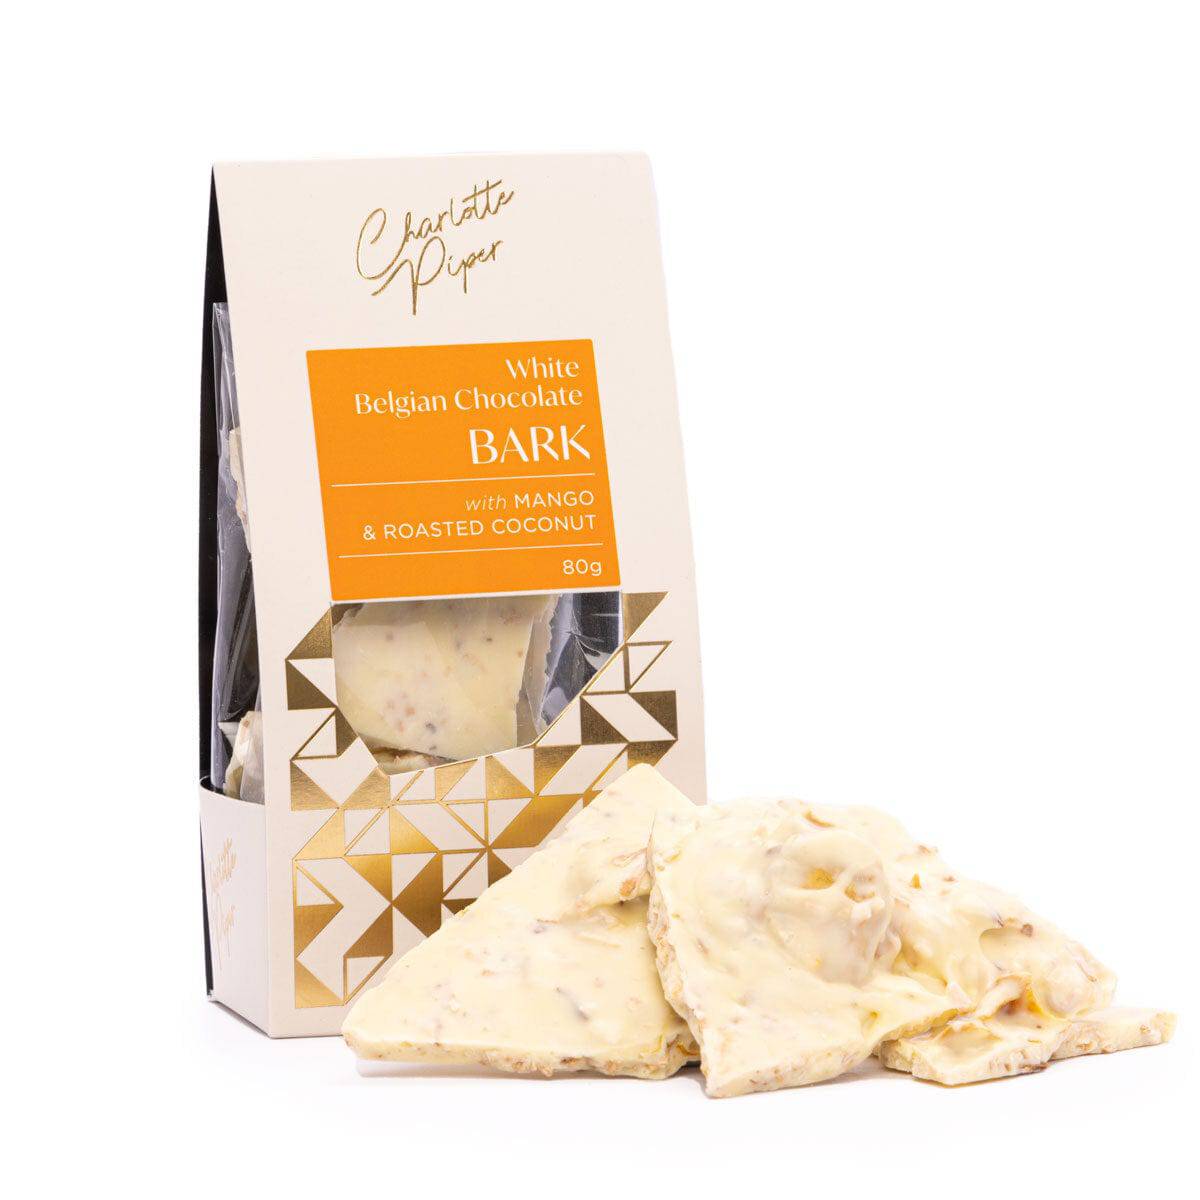 BLOOMHAUS MELBOURNE White Belgian Chocolate Bark with Mango and Roasted Coconut Charlotte Piper Chocolate Bark